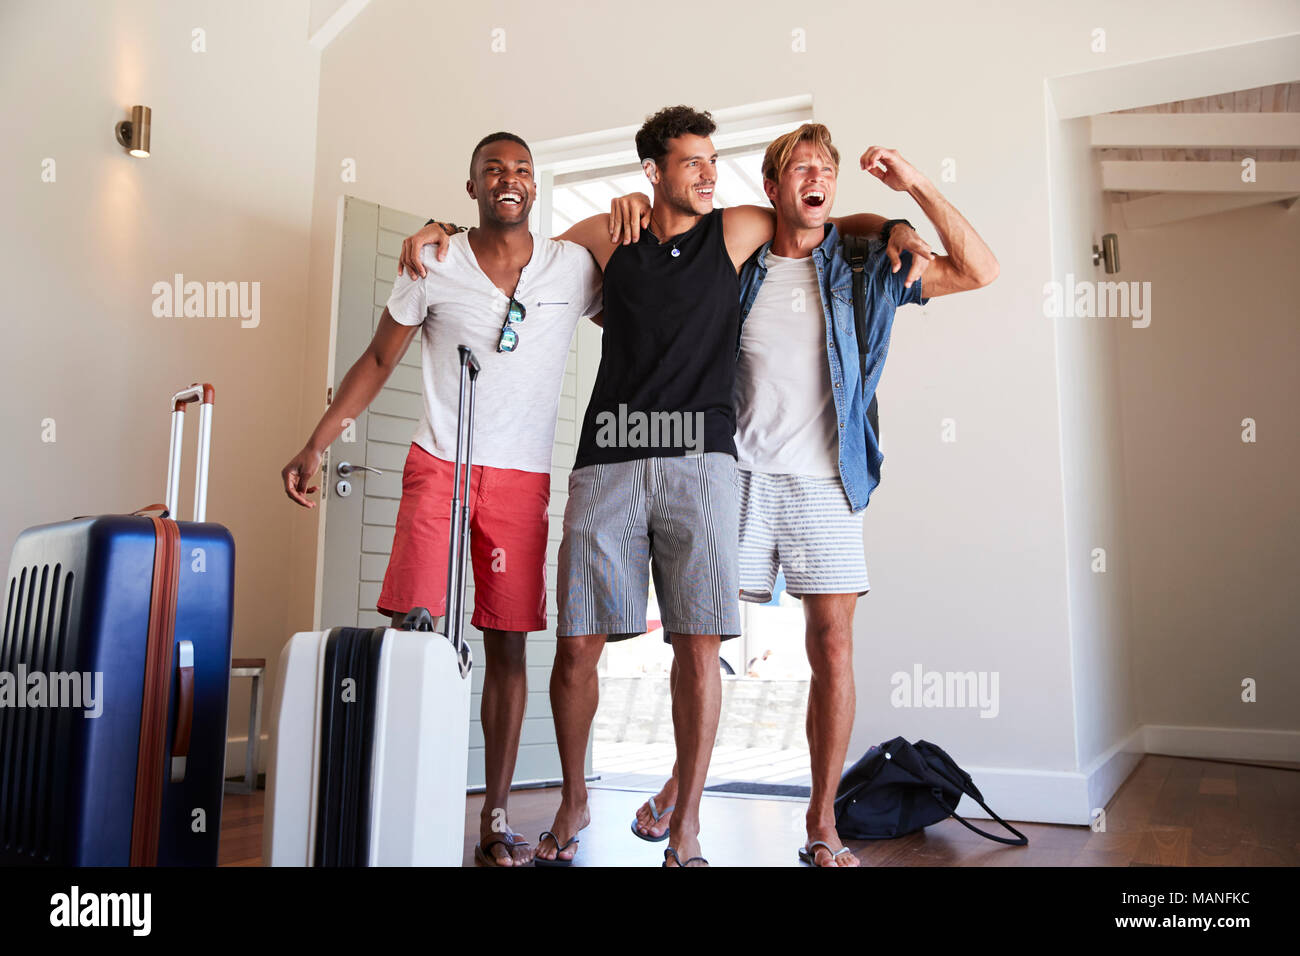 Group Of Male Friends Arriving At Summer Vacation Rental Stock Photo